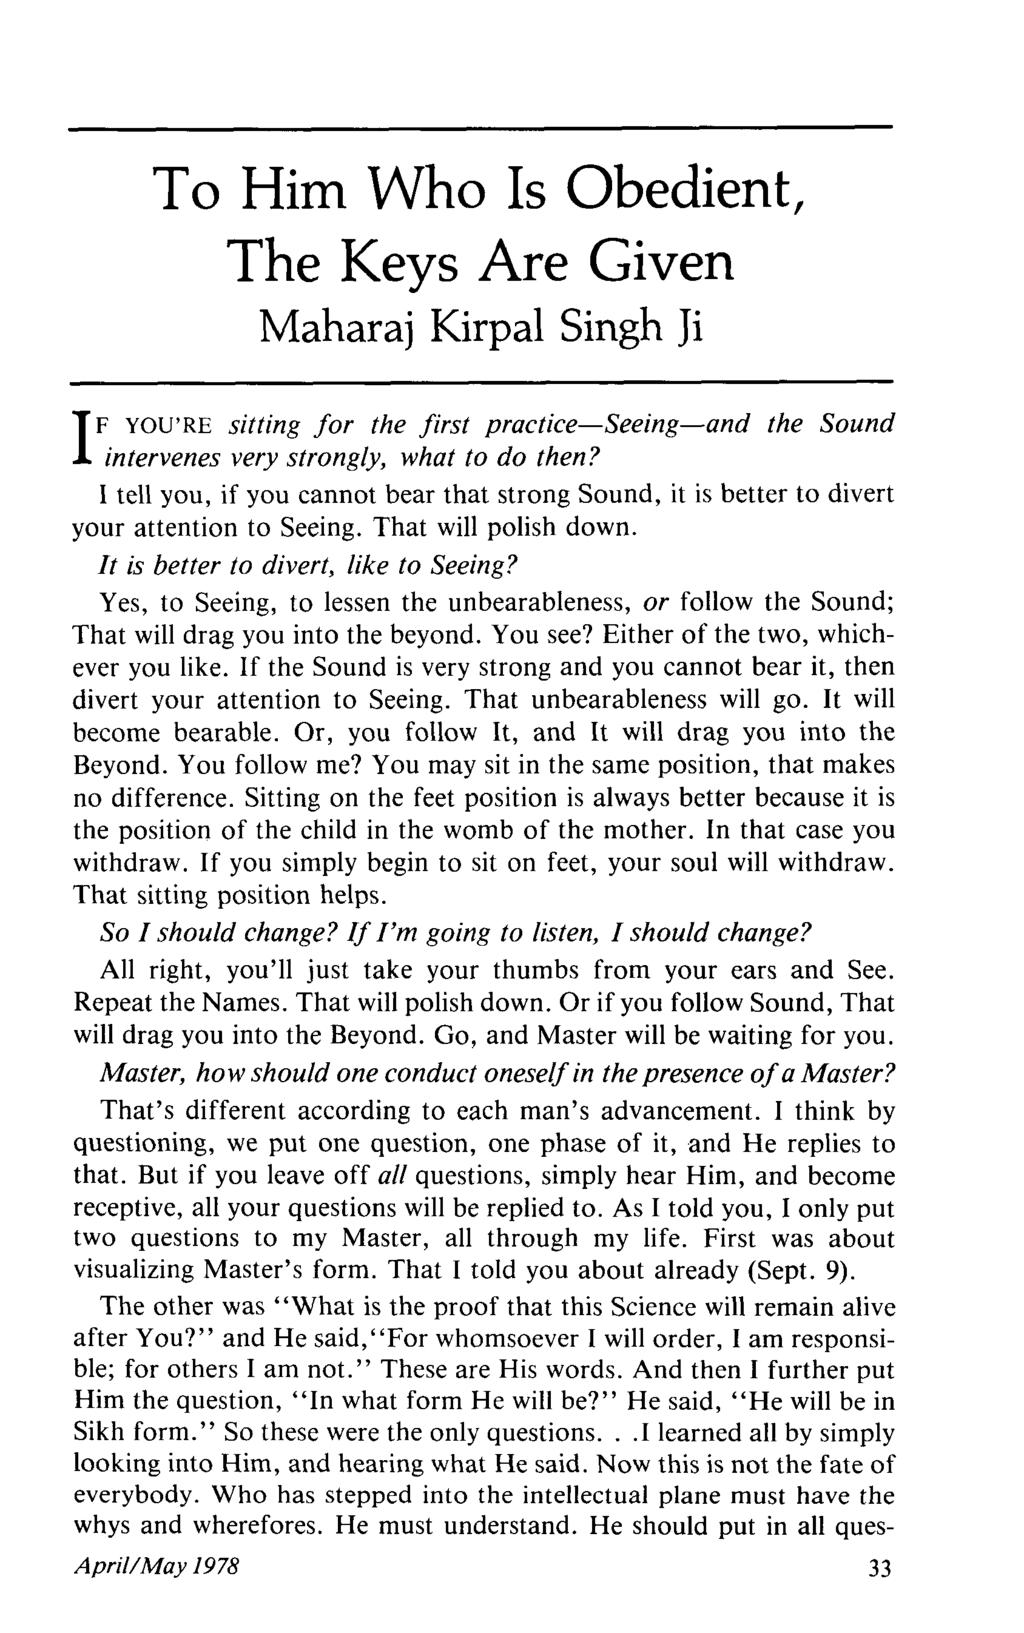 To Him Who Is Obedient, The Keys Are Given Maharaj Kirpal Singh Ji F YOU'RE sitting for the first practice-seeing-and the Sound I intervenes very strongly, what to do then?